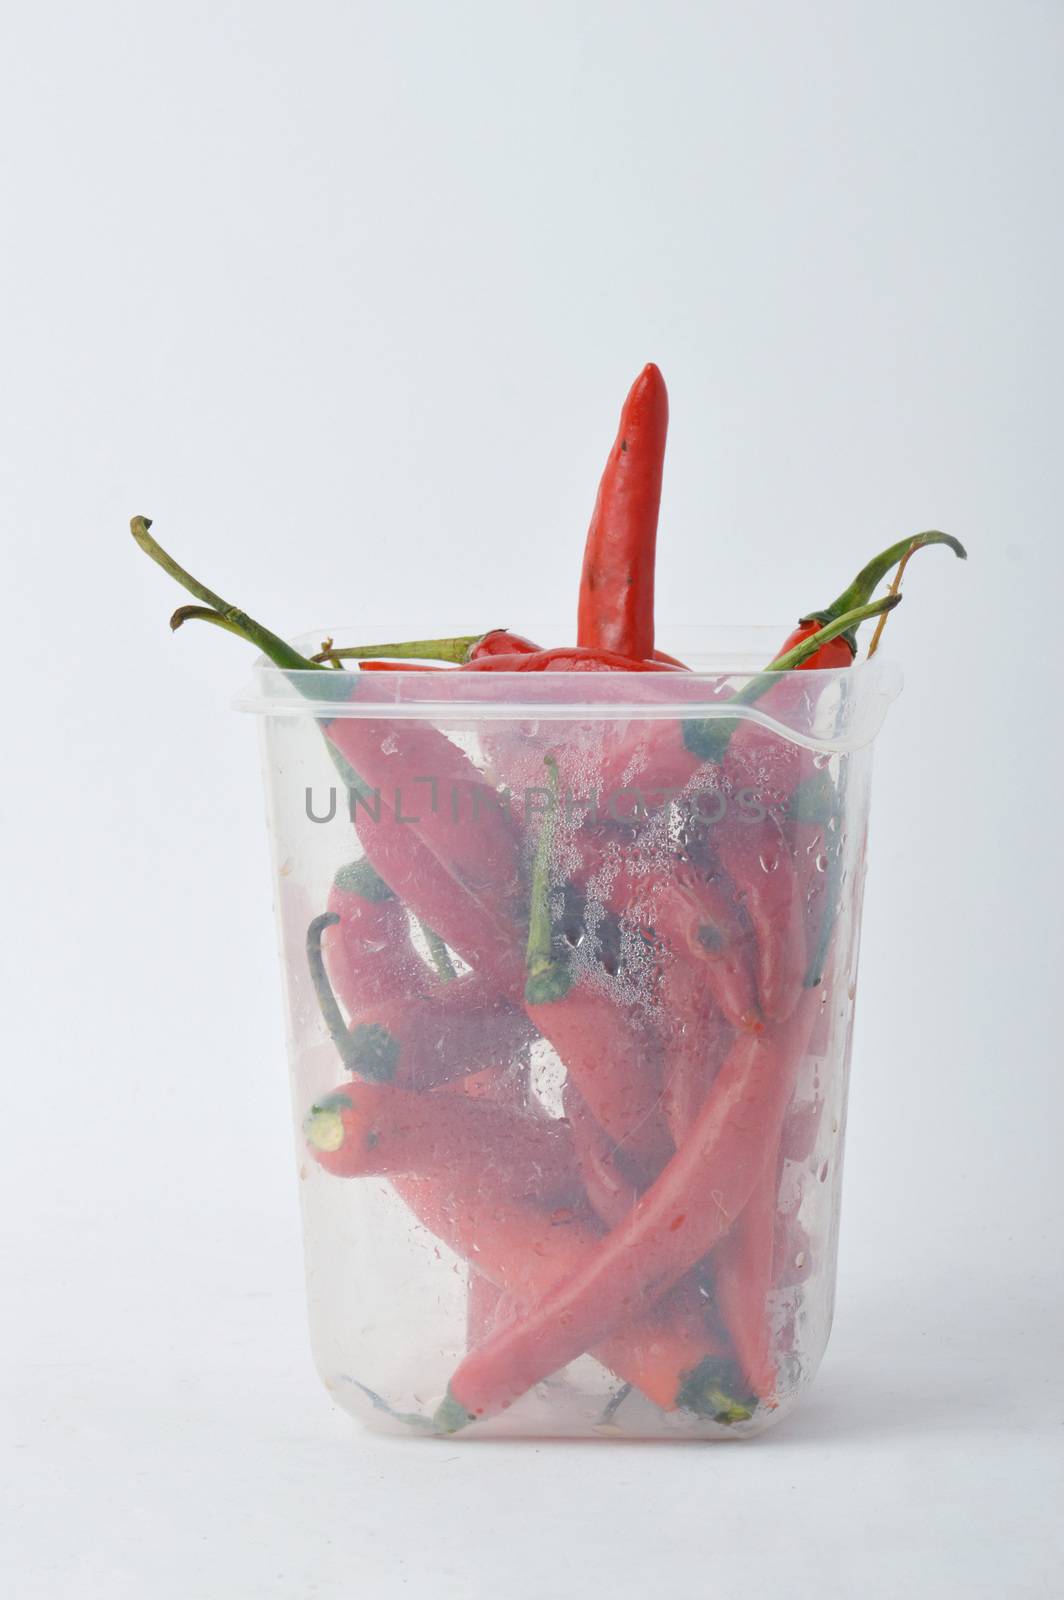 big chili red in a plastic jar on white background